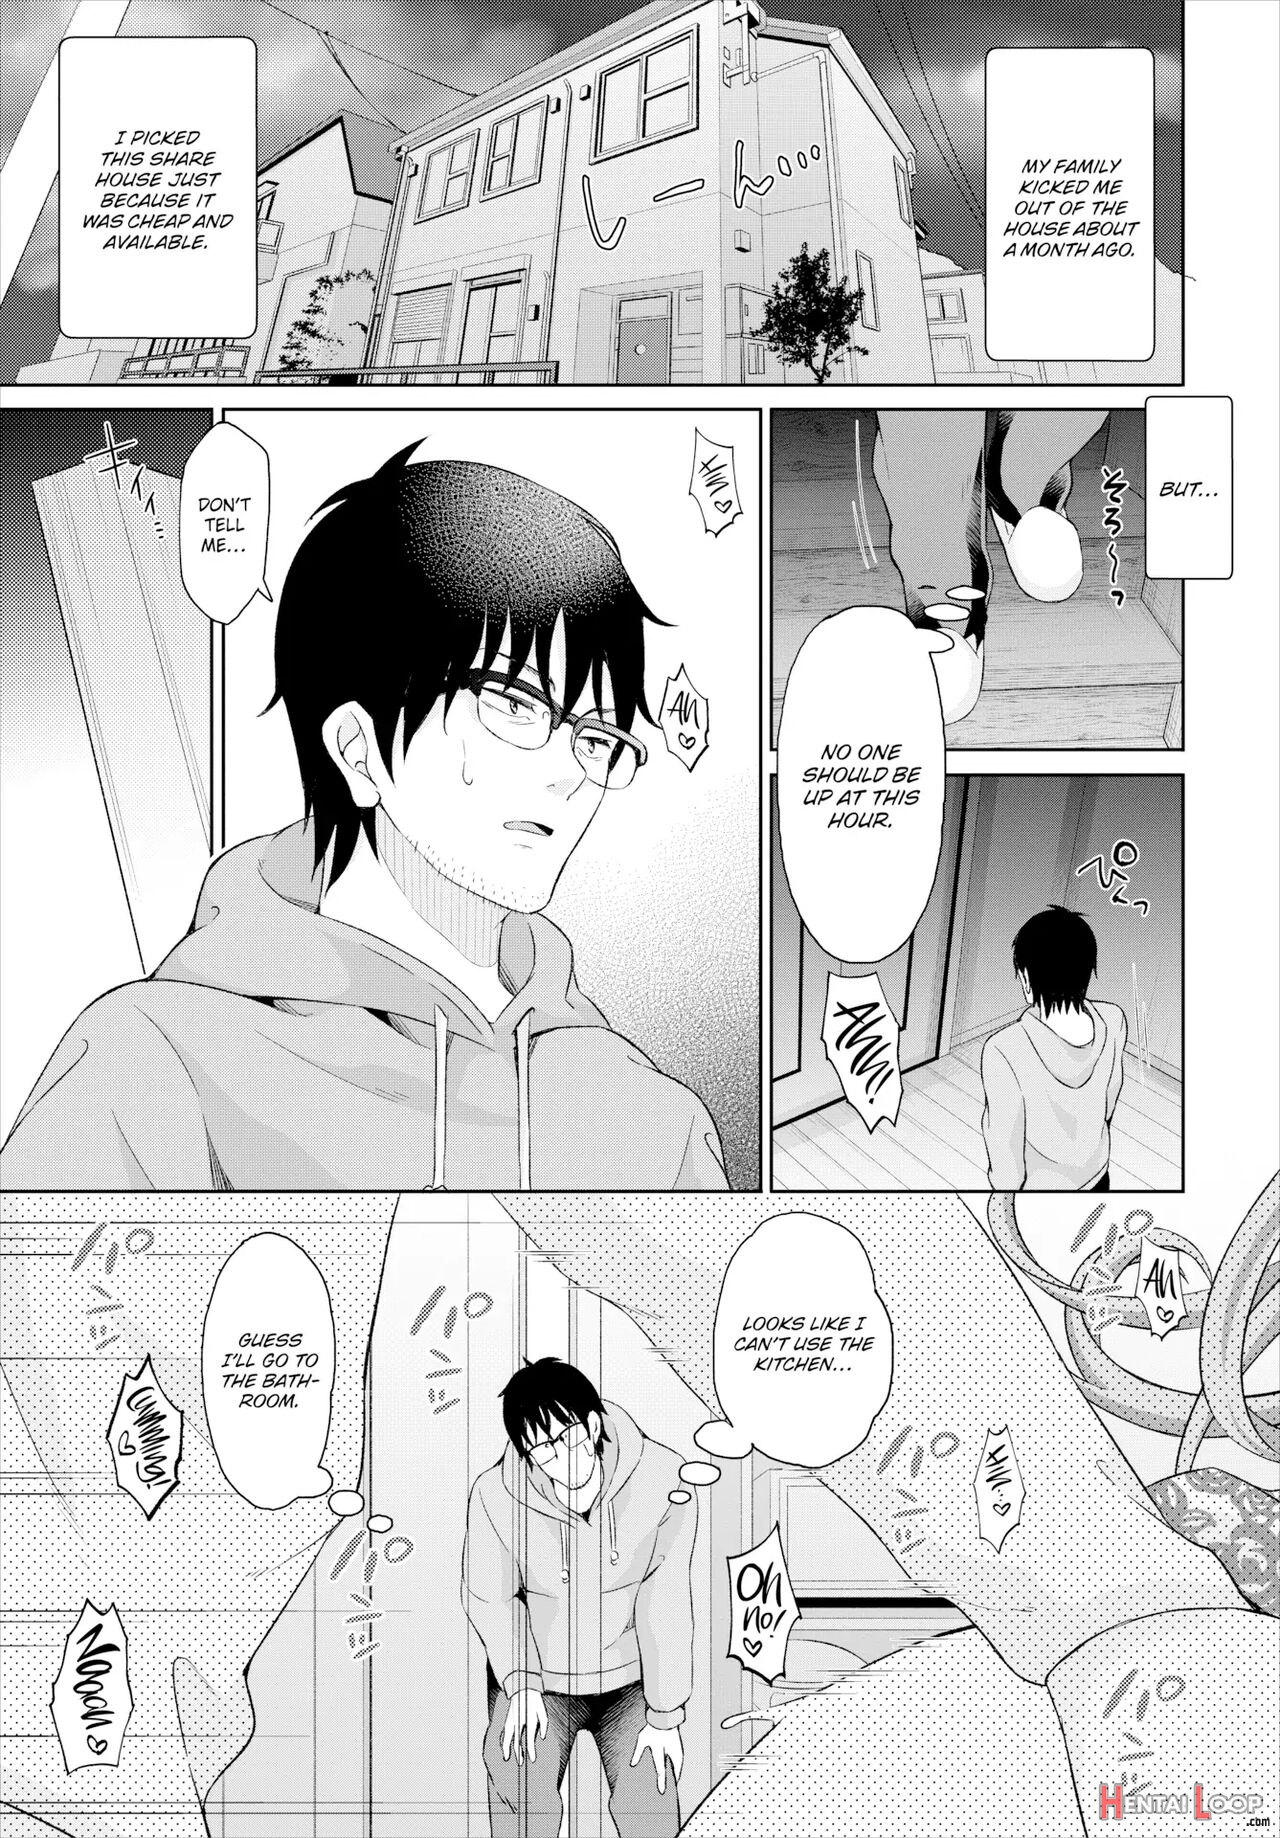 I, A Gloomy Person, Used A Magical Item To Create My Own Harem In The Shared House! Ch. 1-14 page 2